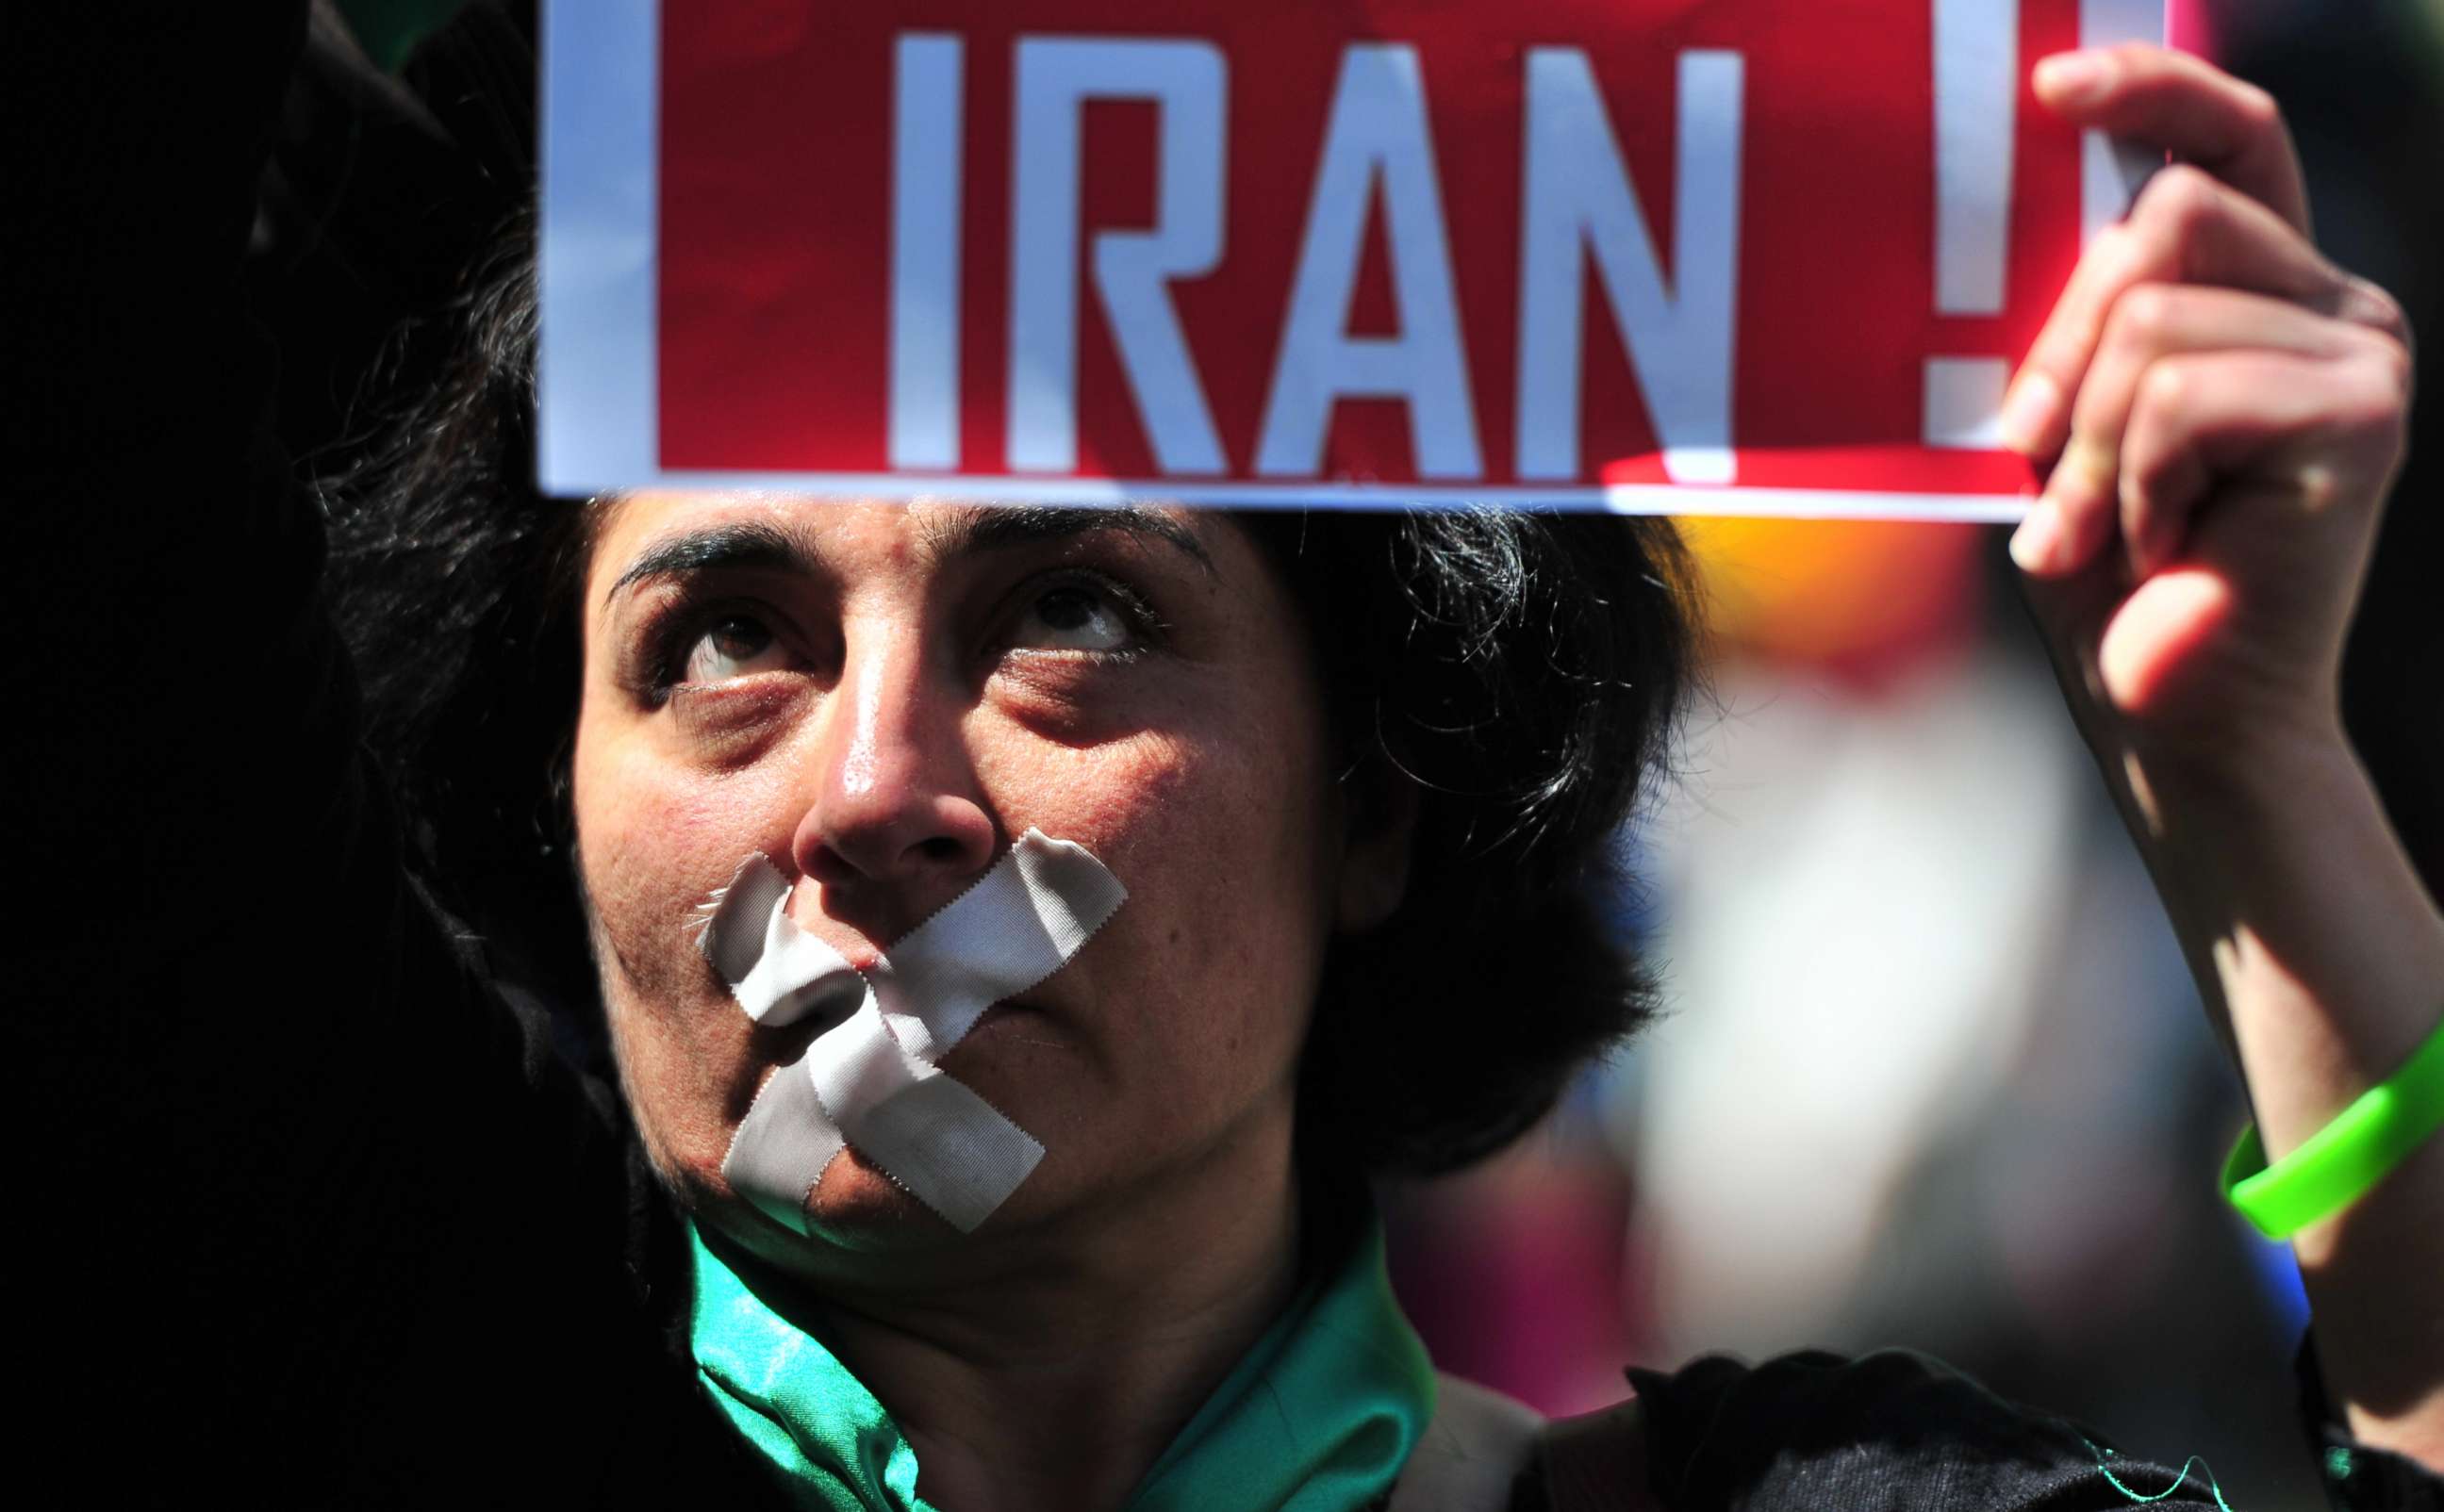 PHOTO: A woman demonstrates against the situation in Iran during the Christopher Street Day gay pride parade in Berlin on June 19, 2010.